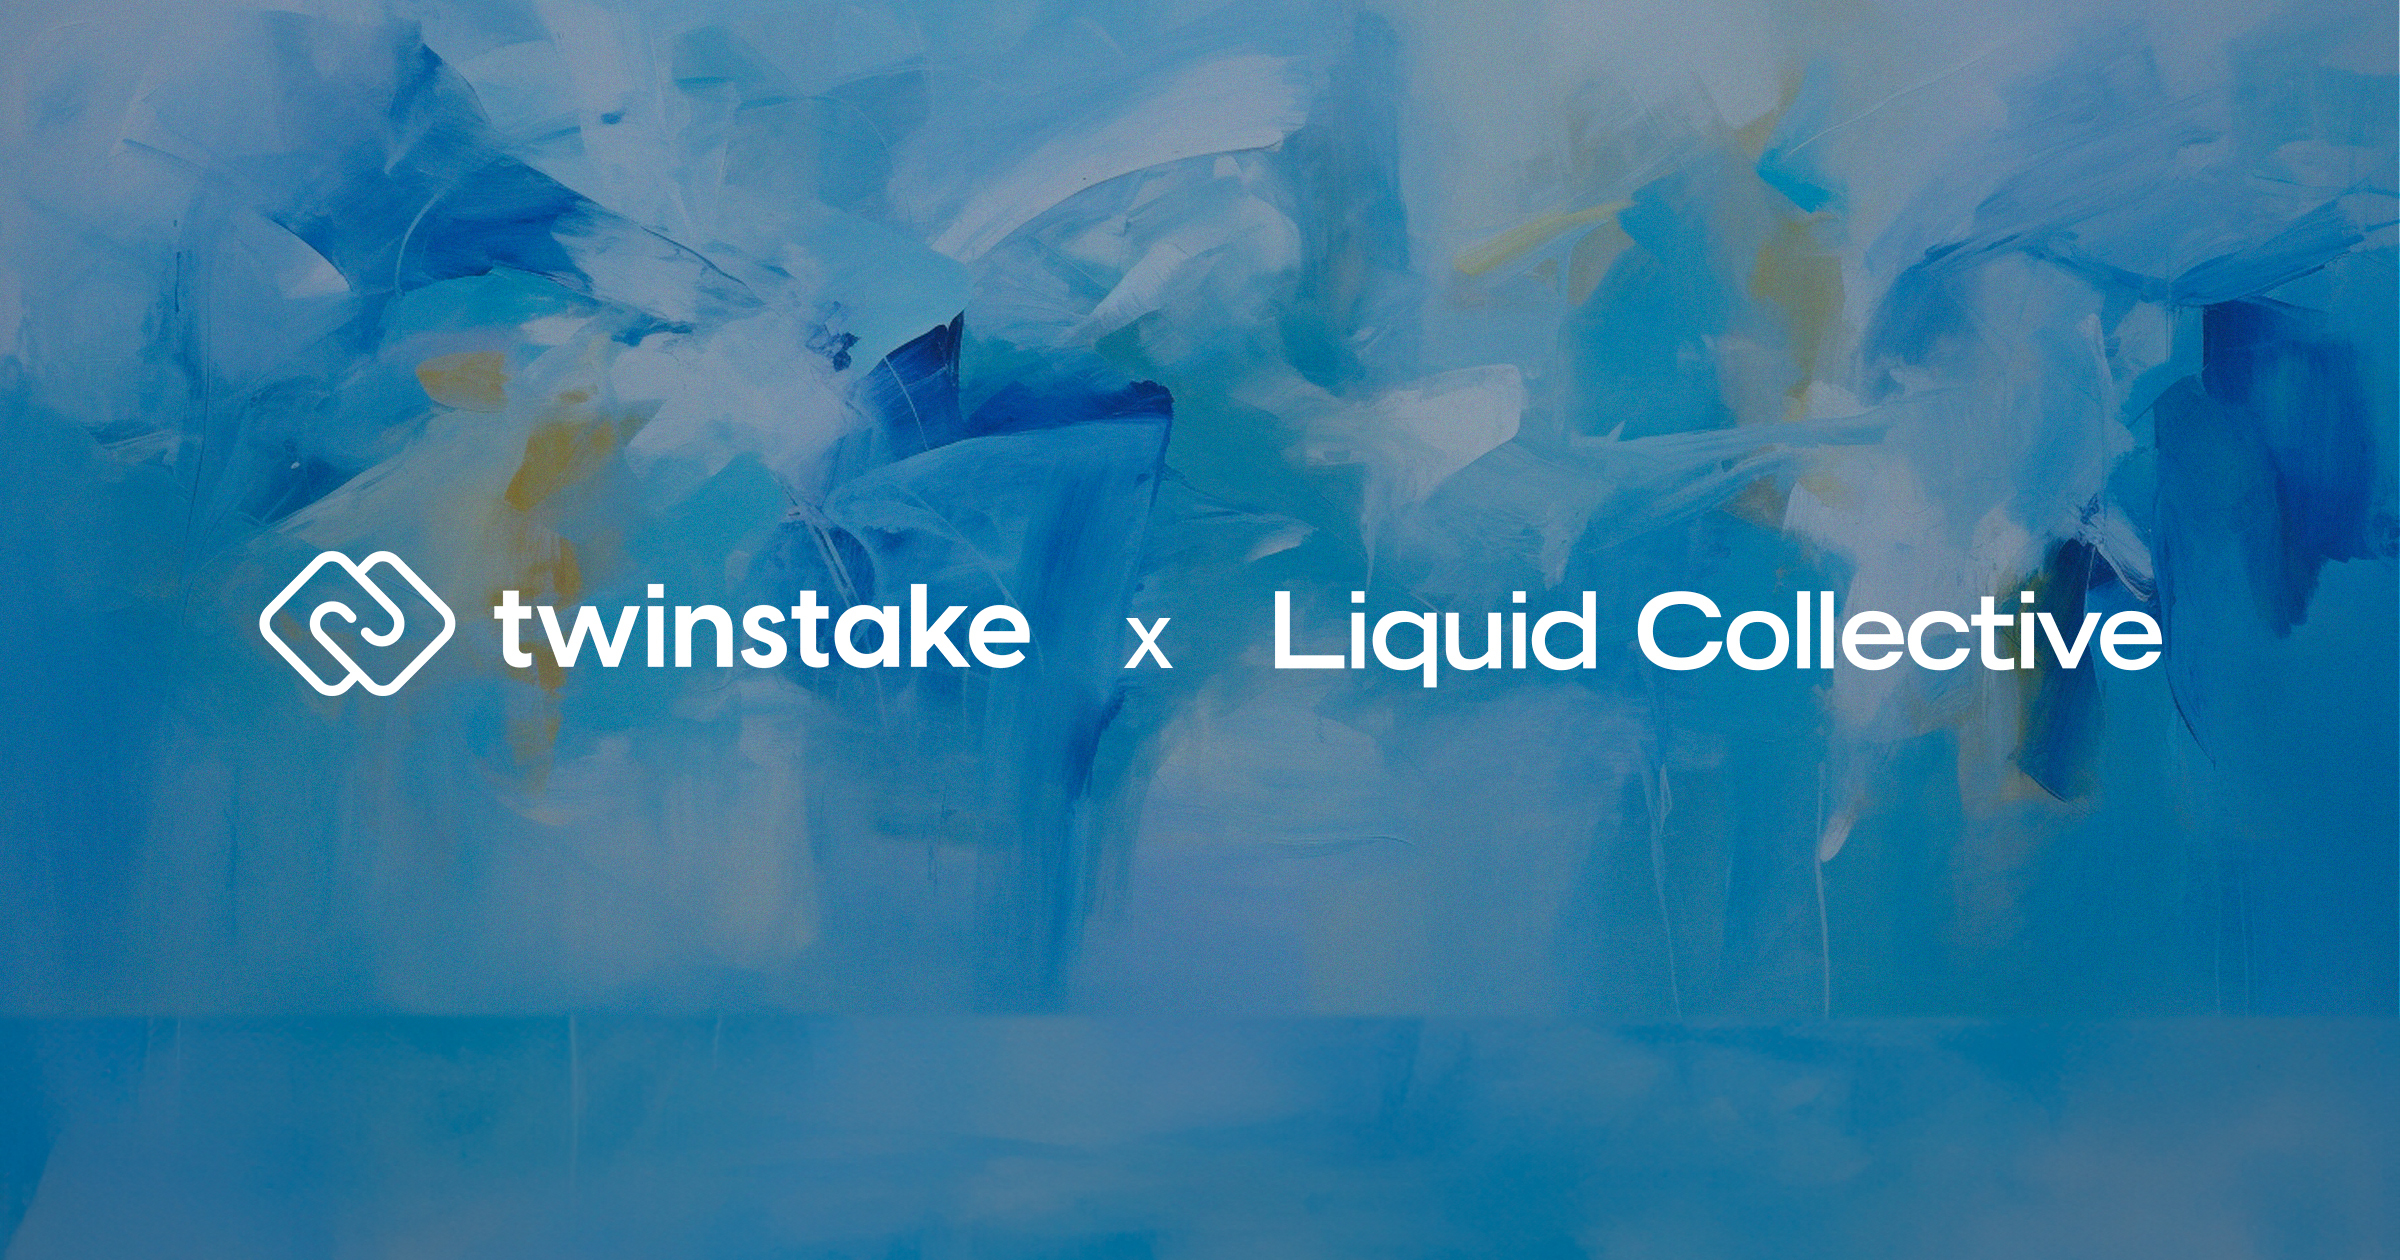 Twinstake joins as an Integrator to offer institutional liquid staking